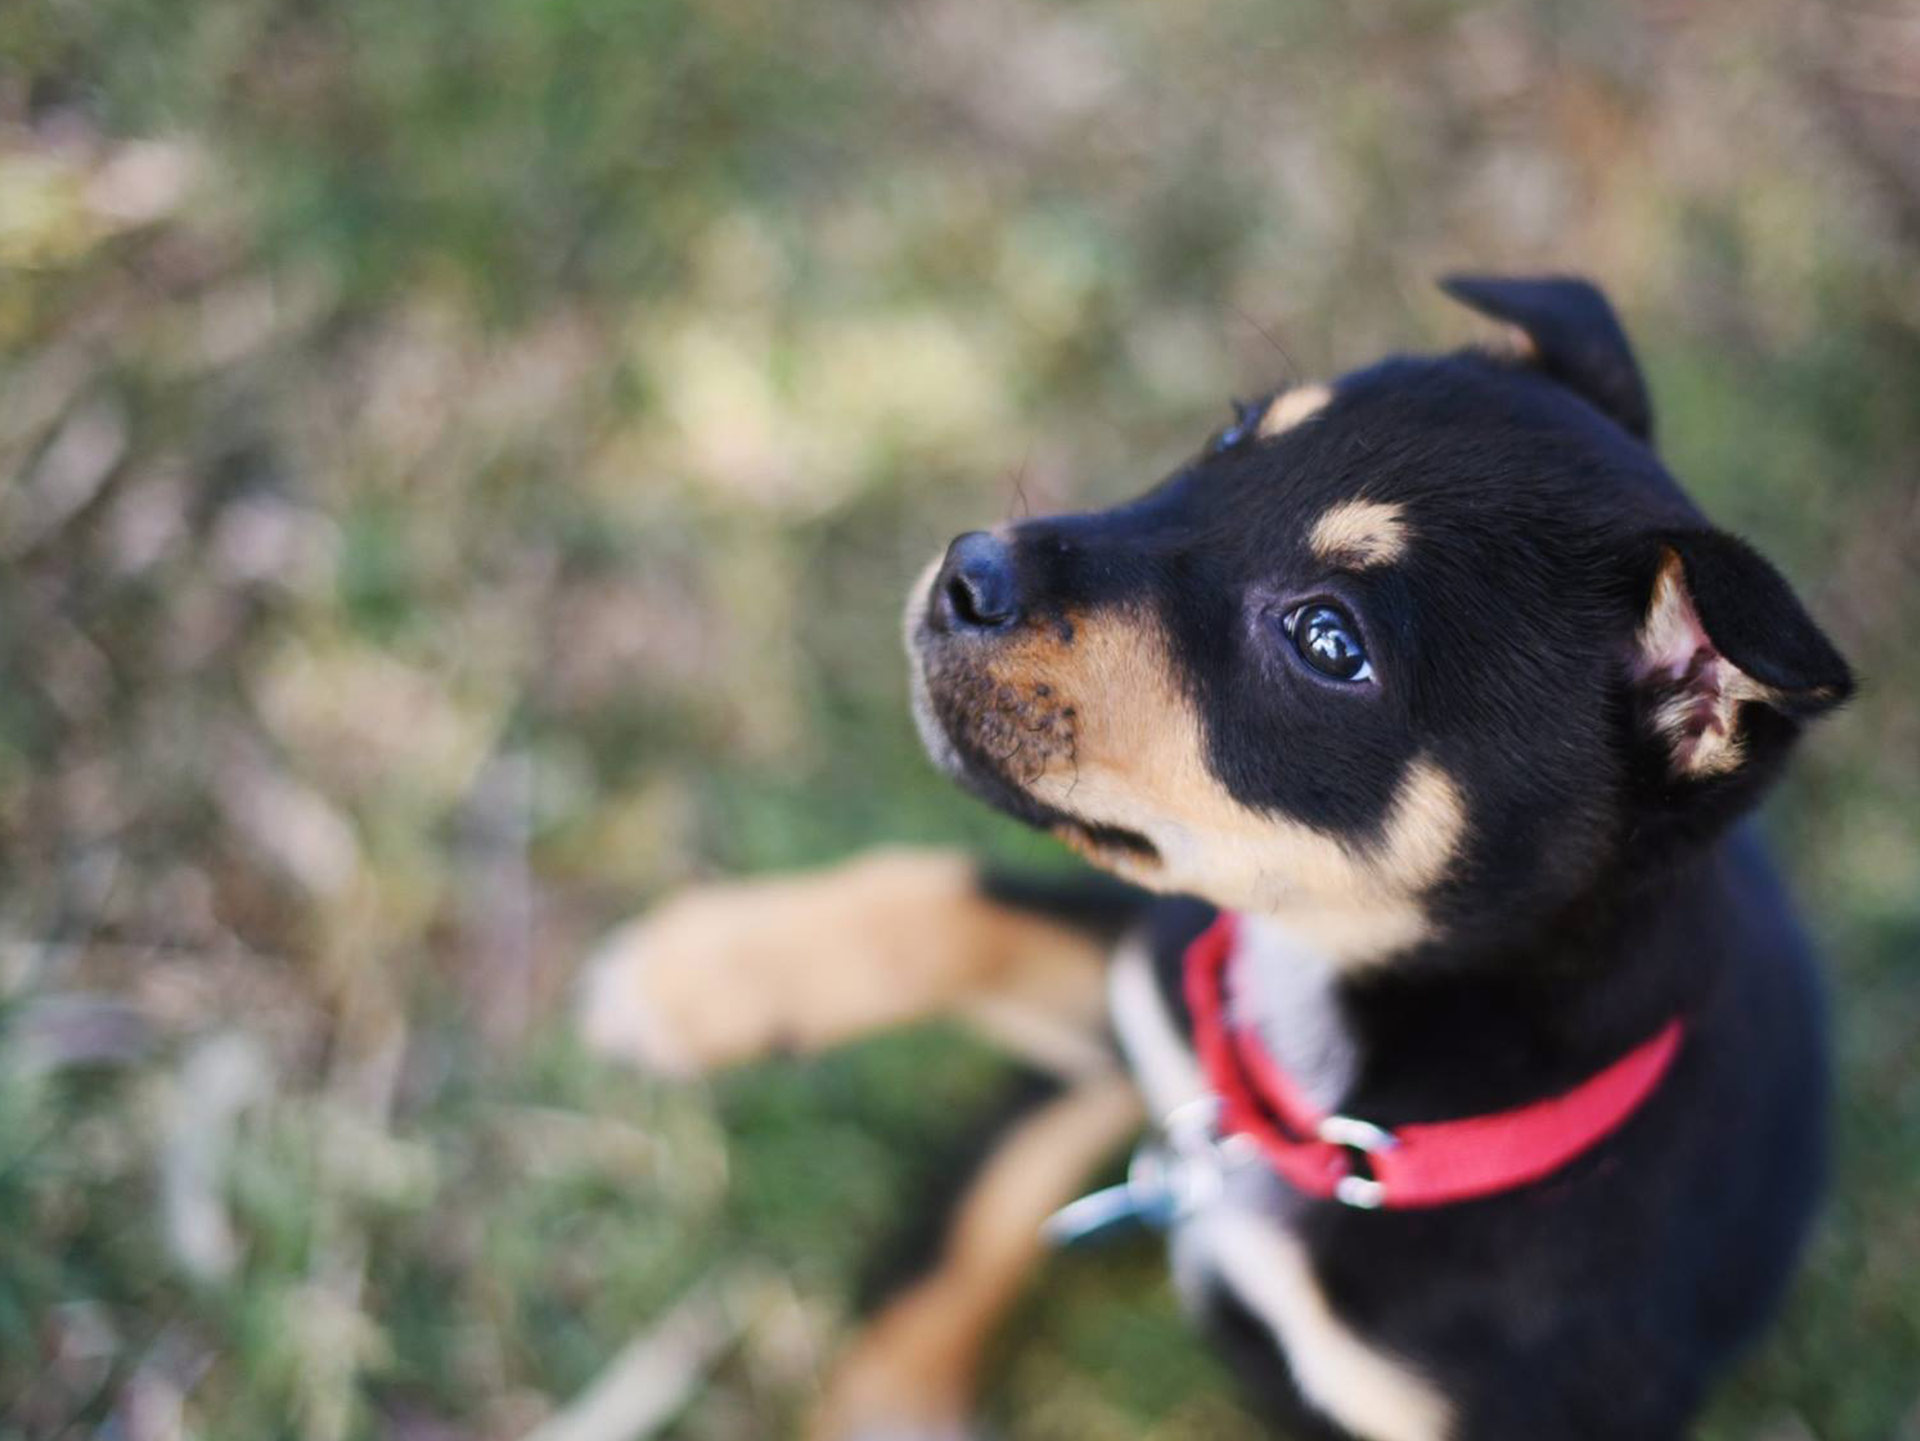 Here’s how you can get paid $500 to play with puppies